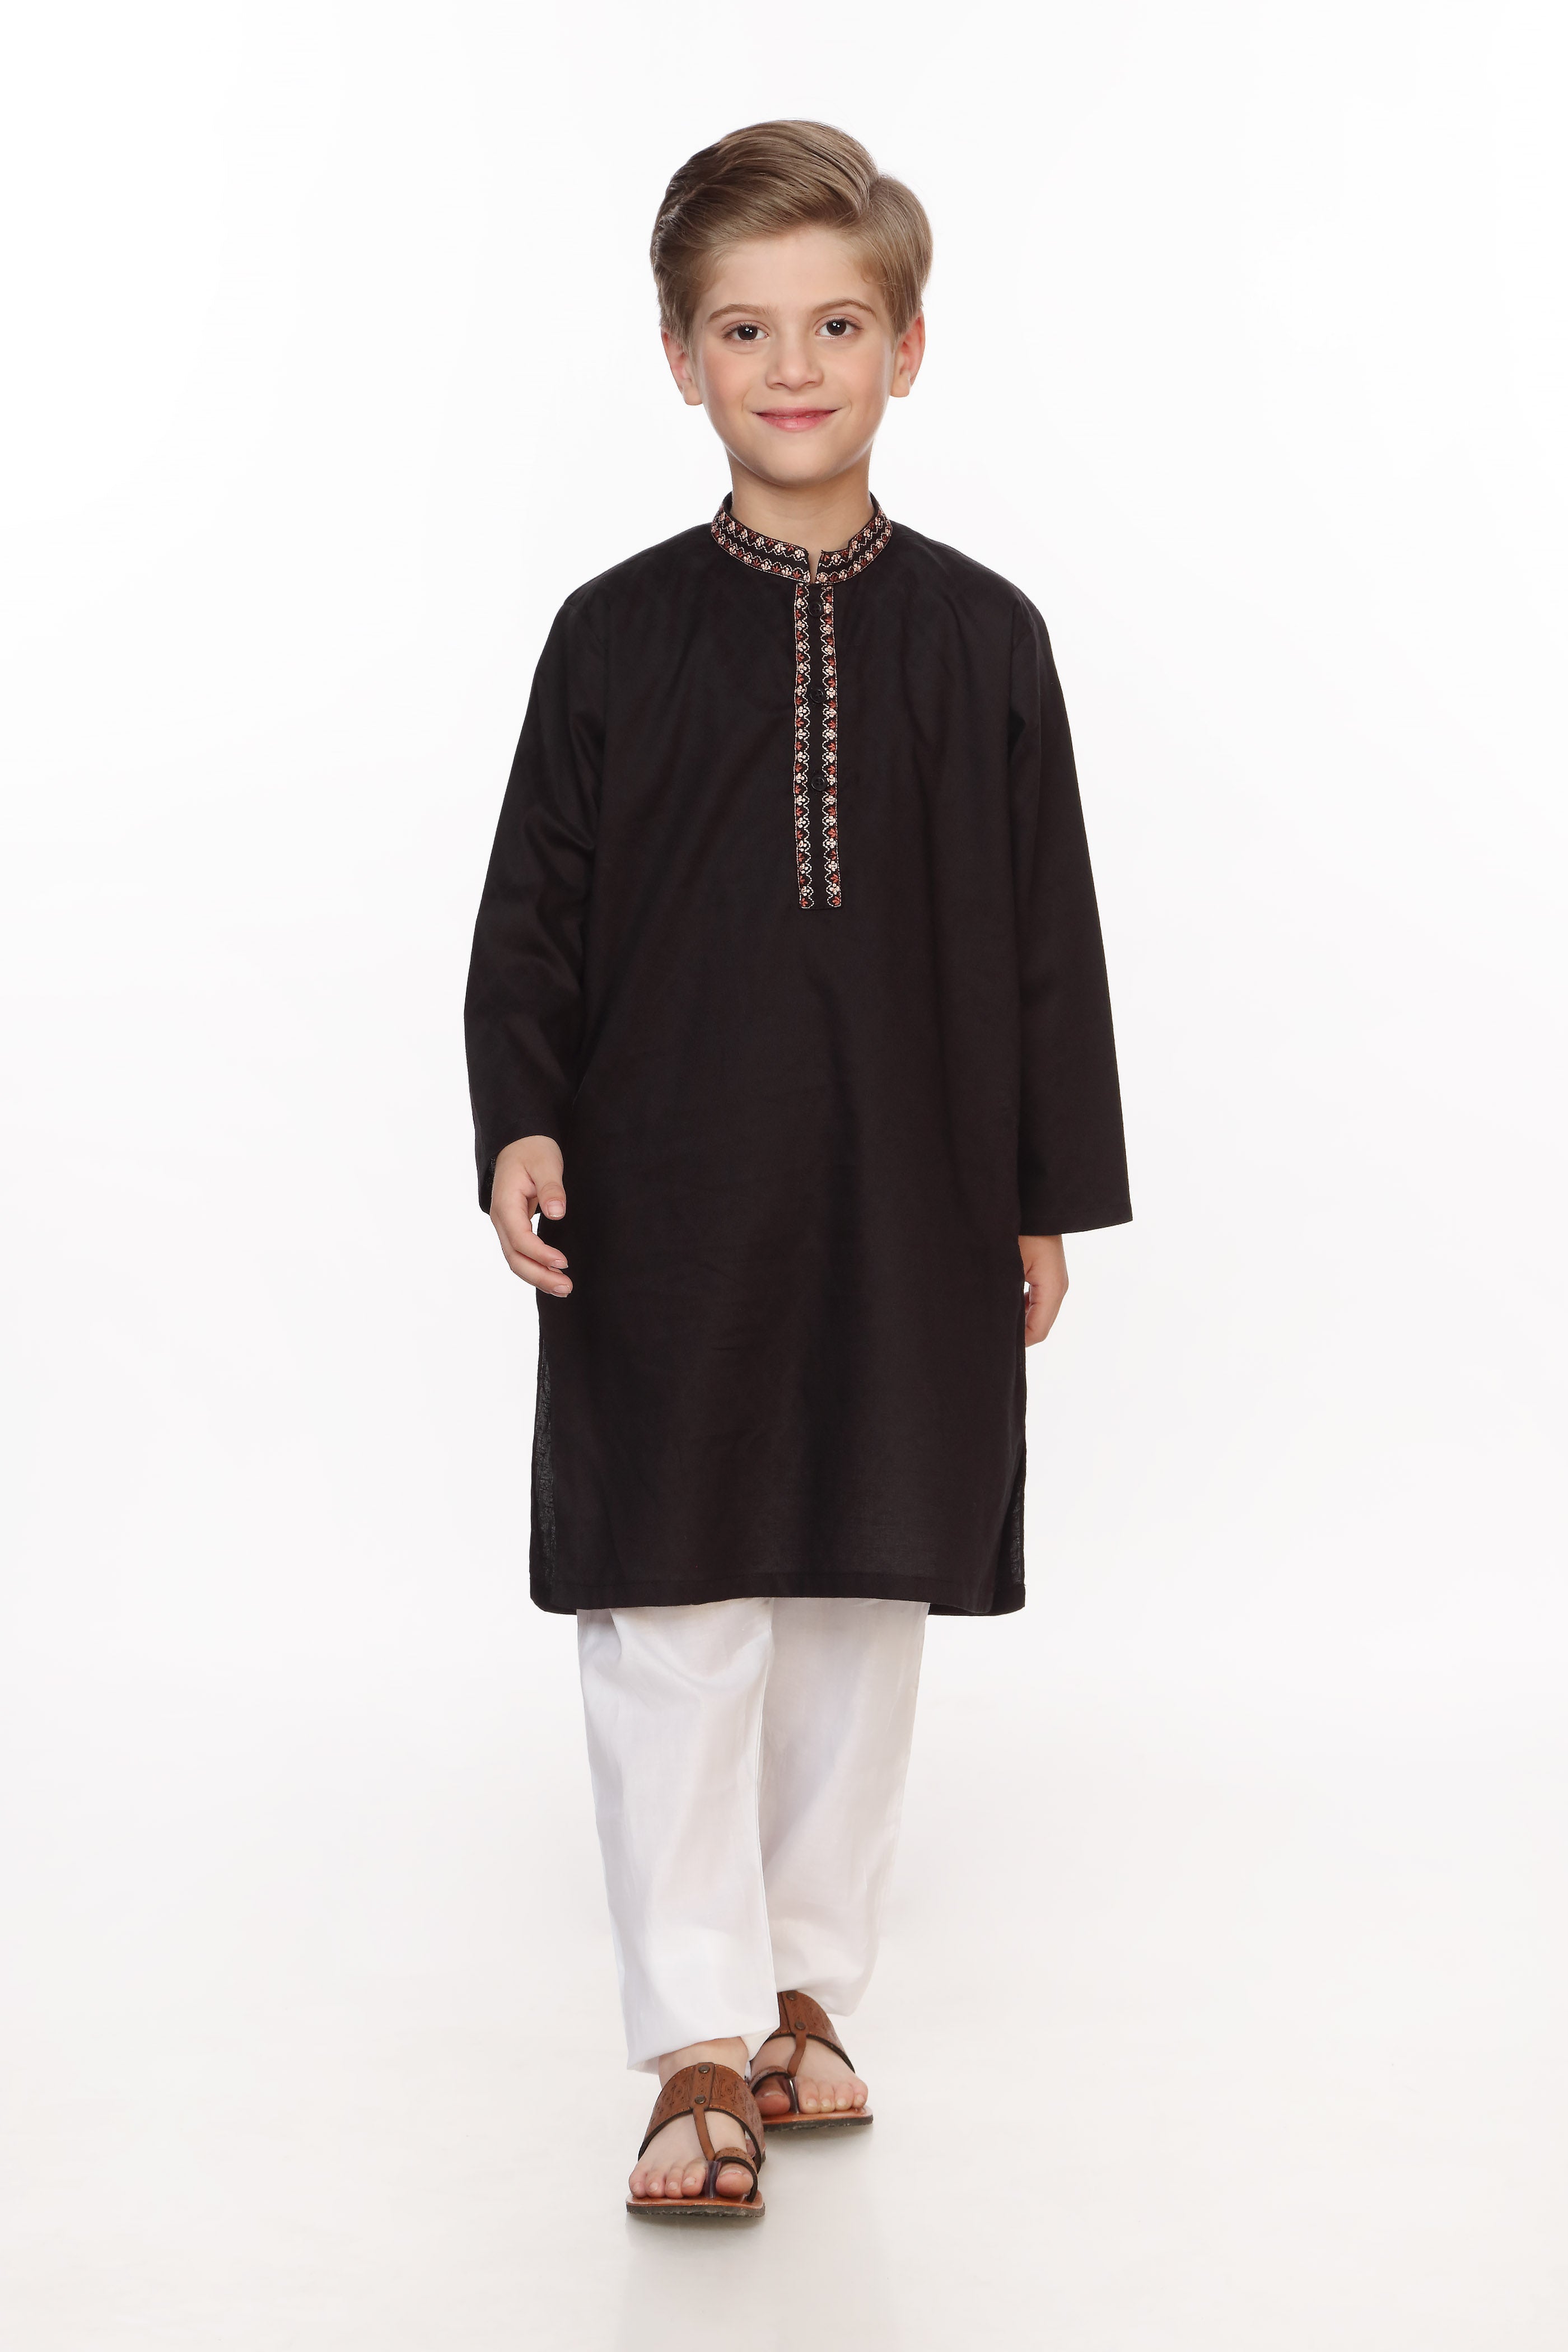 Kurta with Embroidery (FBSK-778)